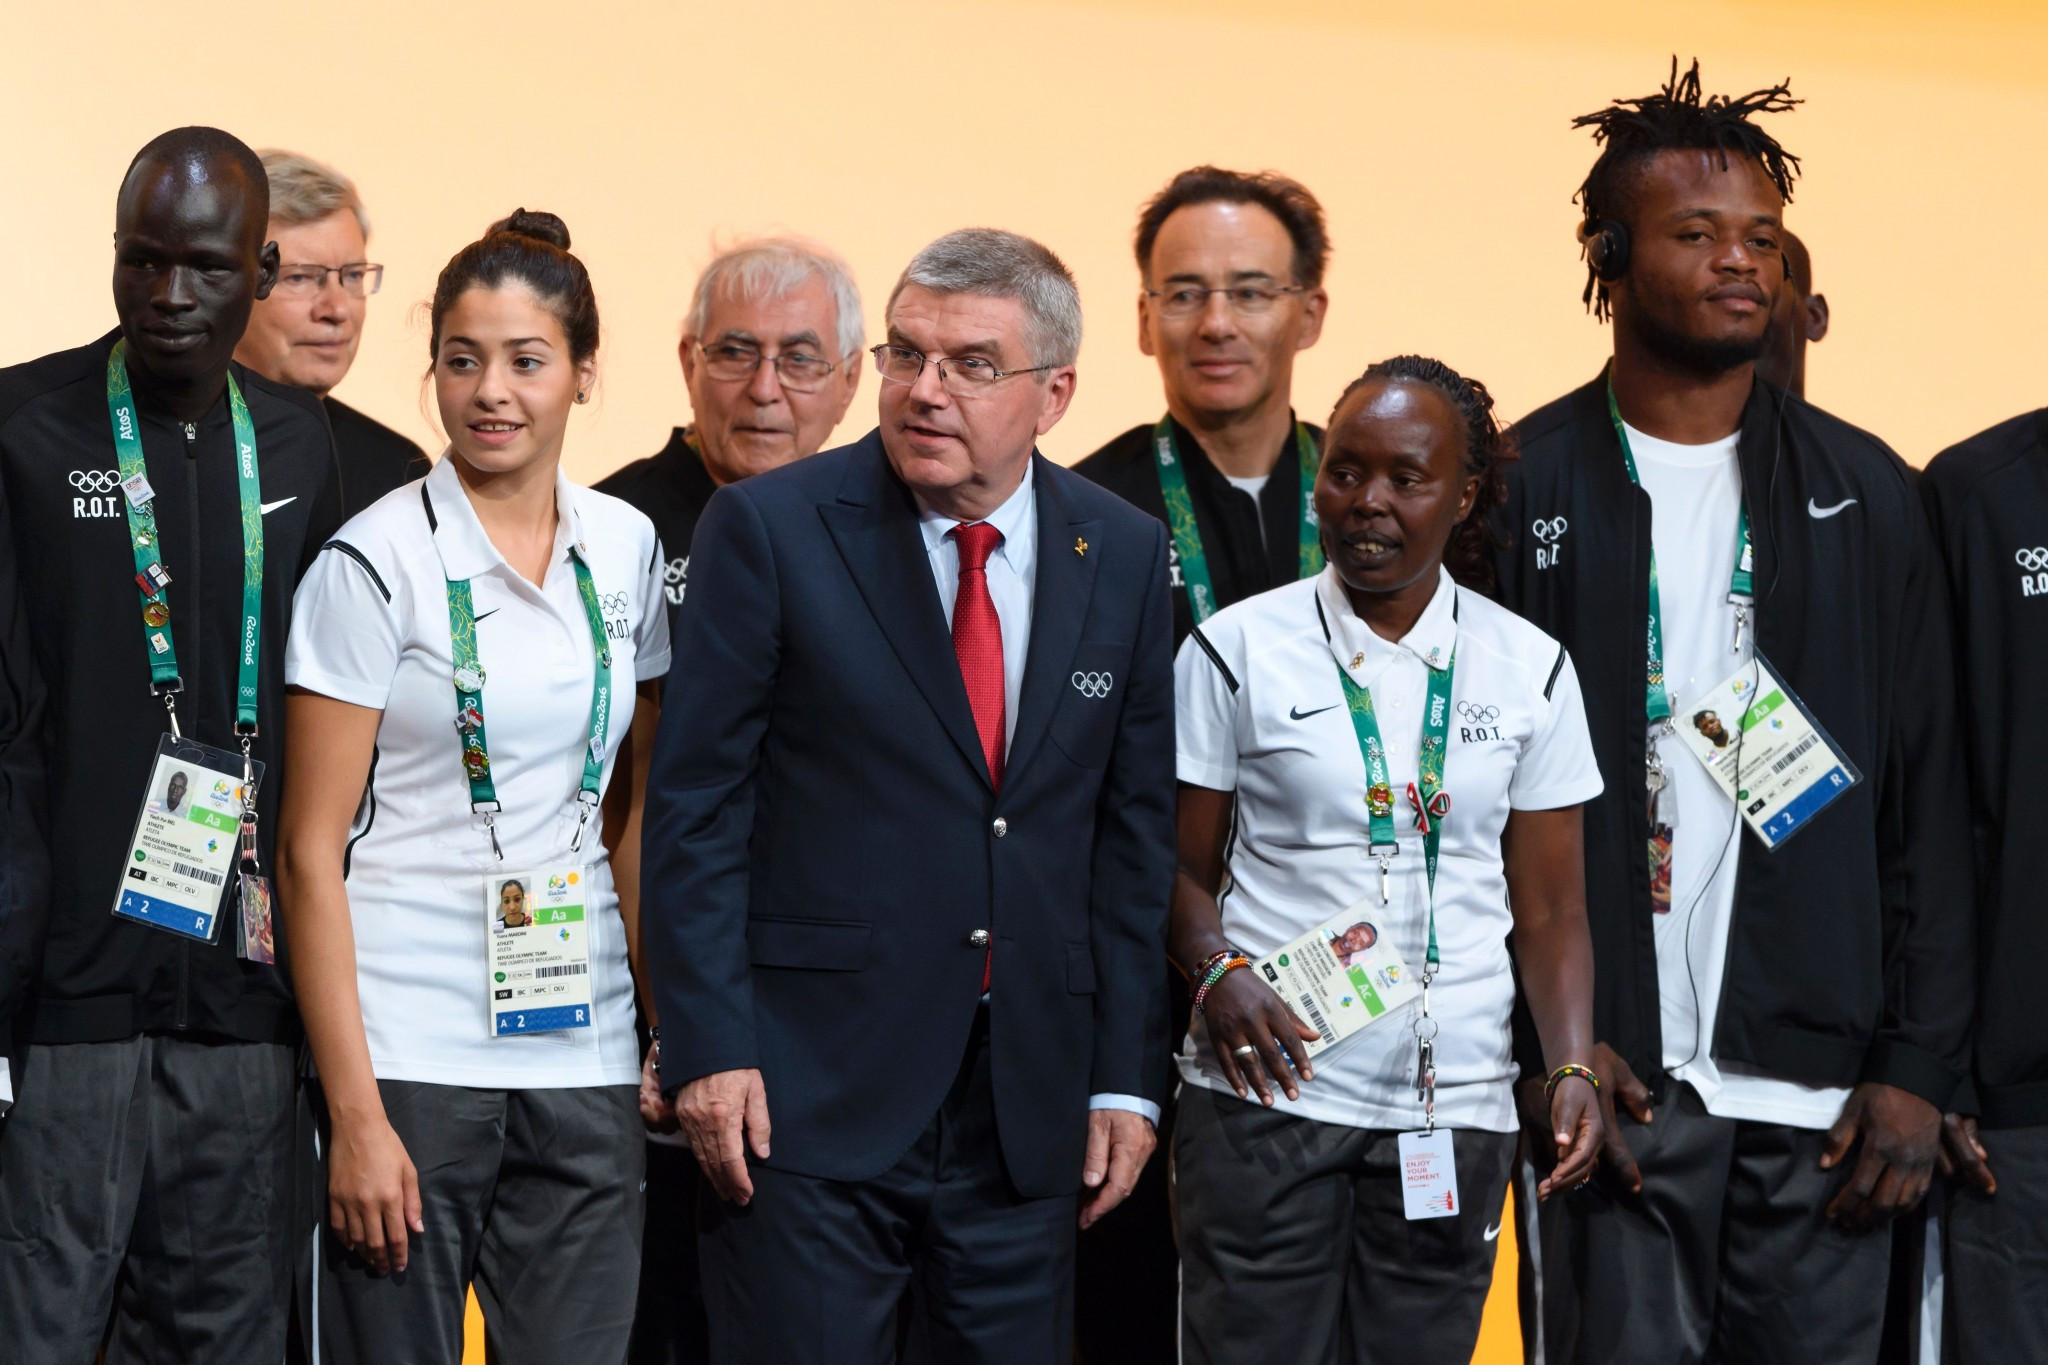 Thomas Bach poses with members of the Refugee Olympic Team at Rio 2016 ©Getty Images